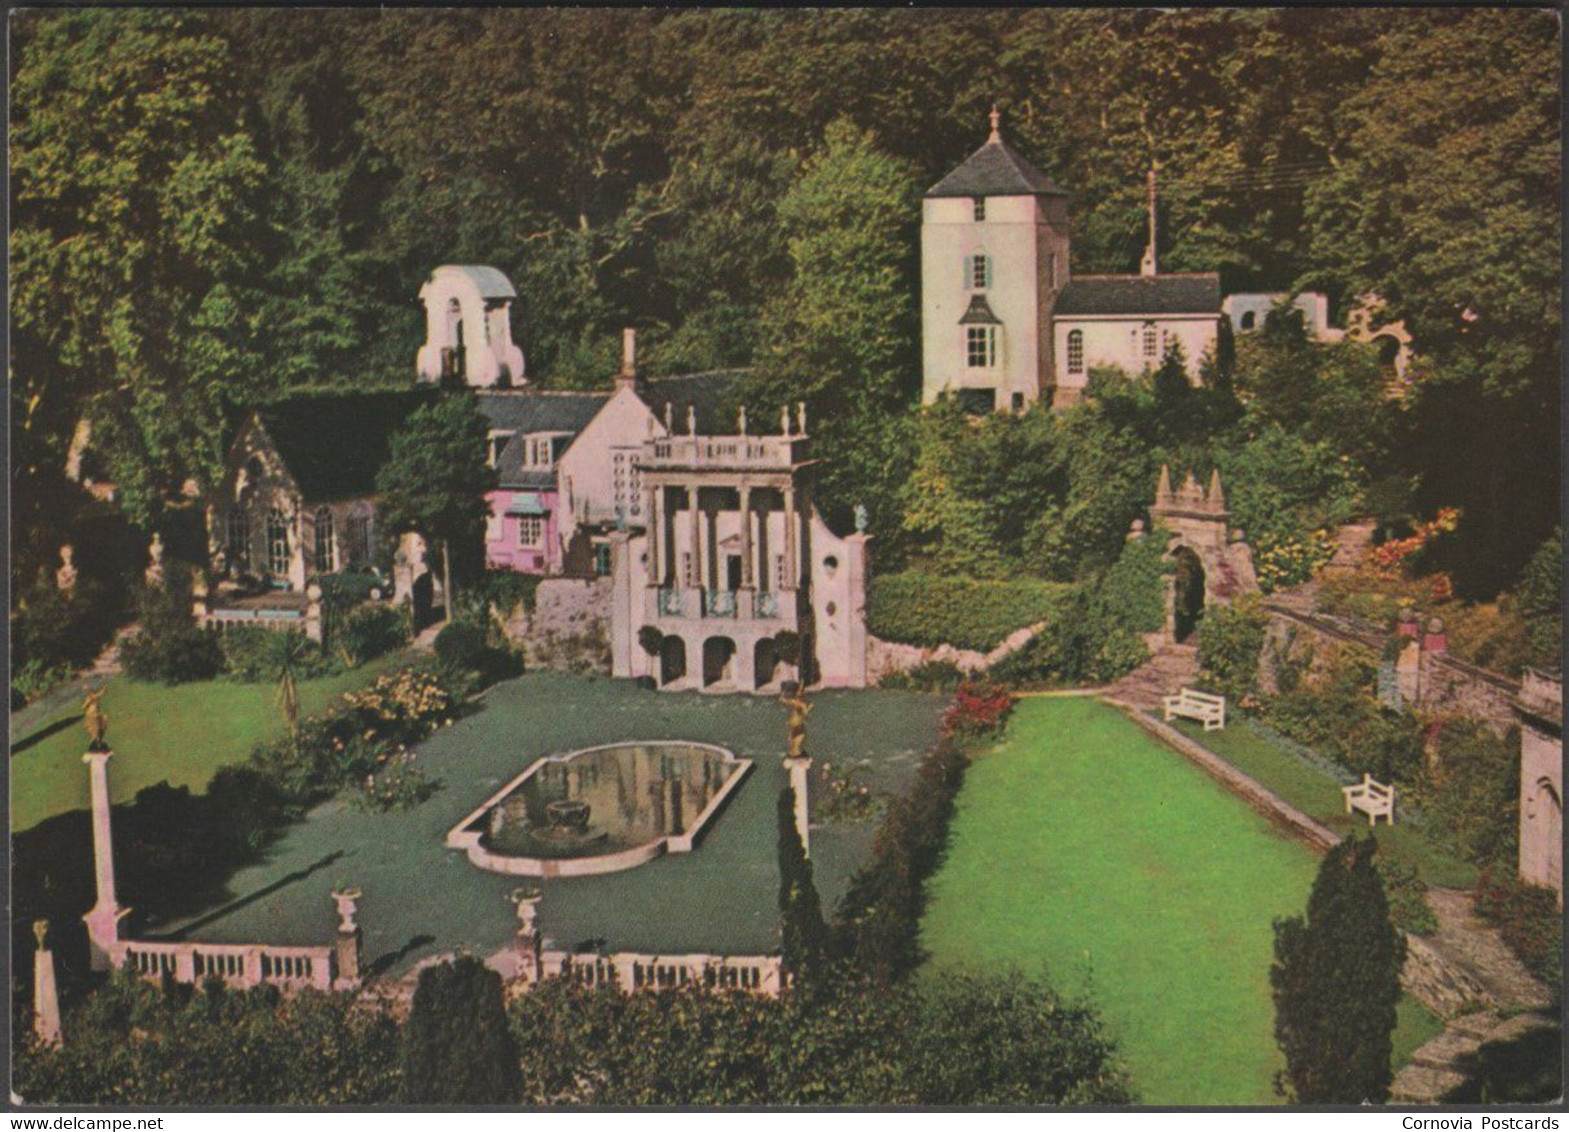 View From The Piazza, Portmeirion, Merionethshire, C.1960s - Bruno De Hamel Postcard - Merionethshire